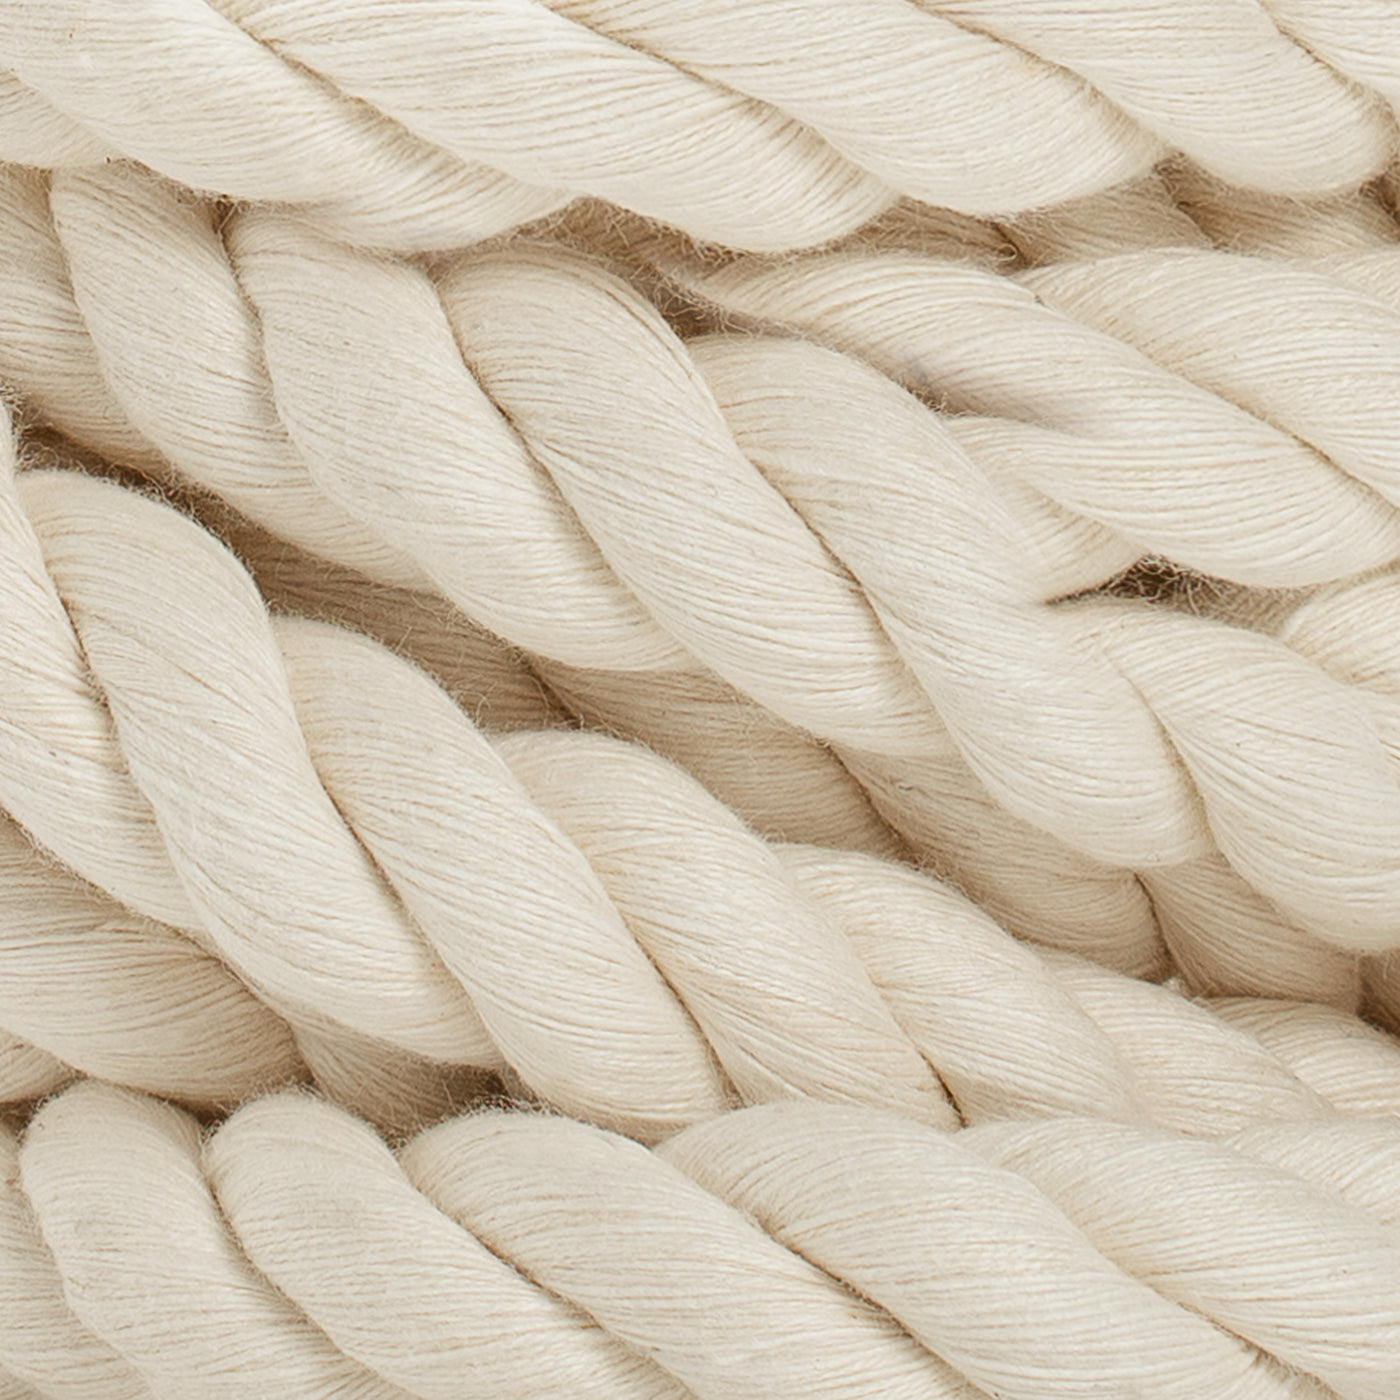 Cotton Rope 13mm & 16mm 3ply Natural, 10 feet